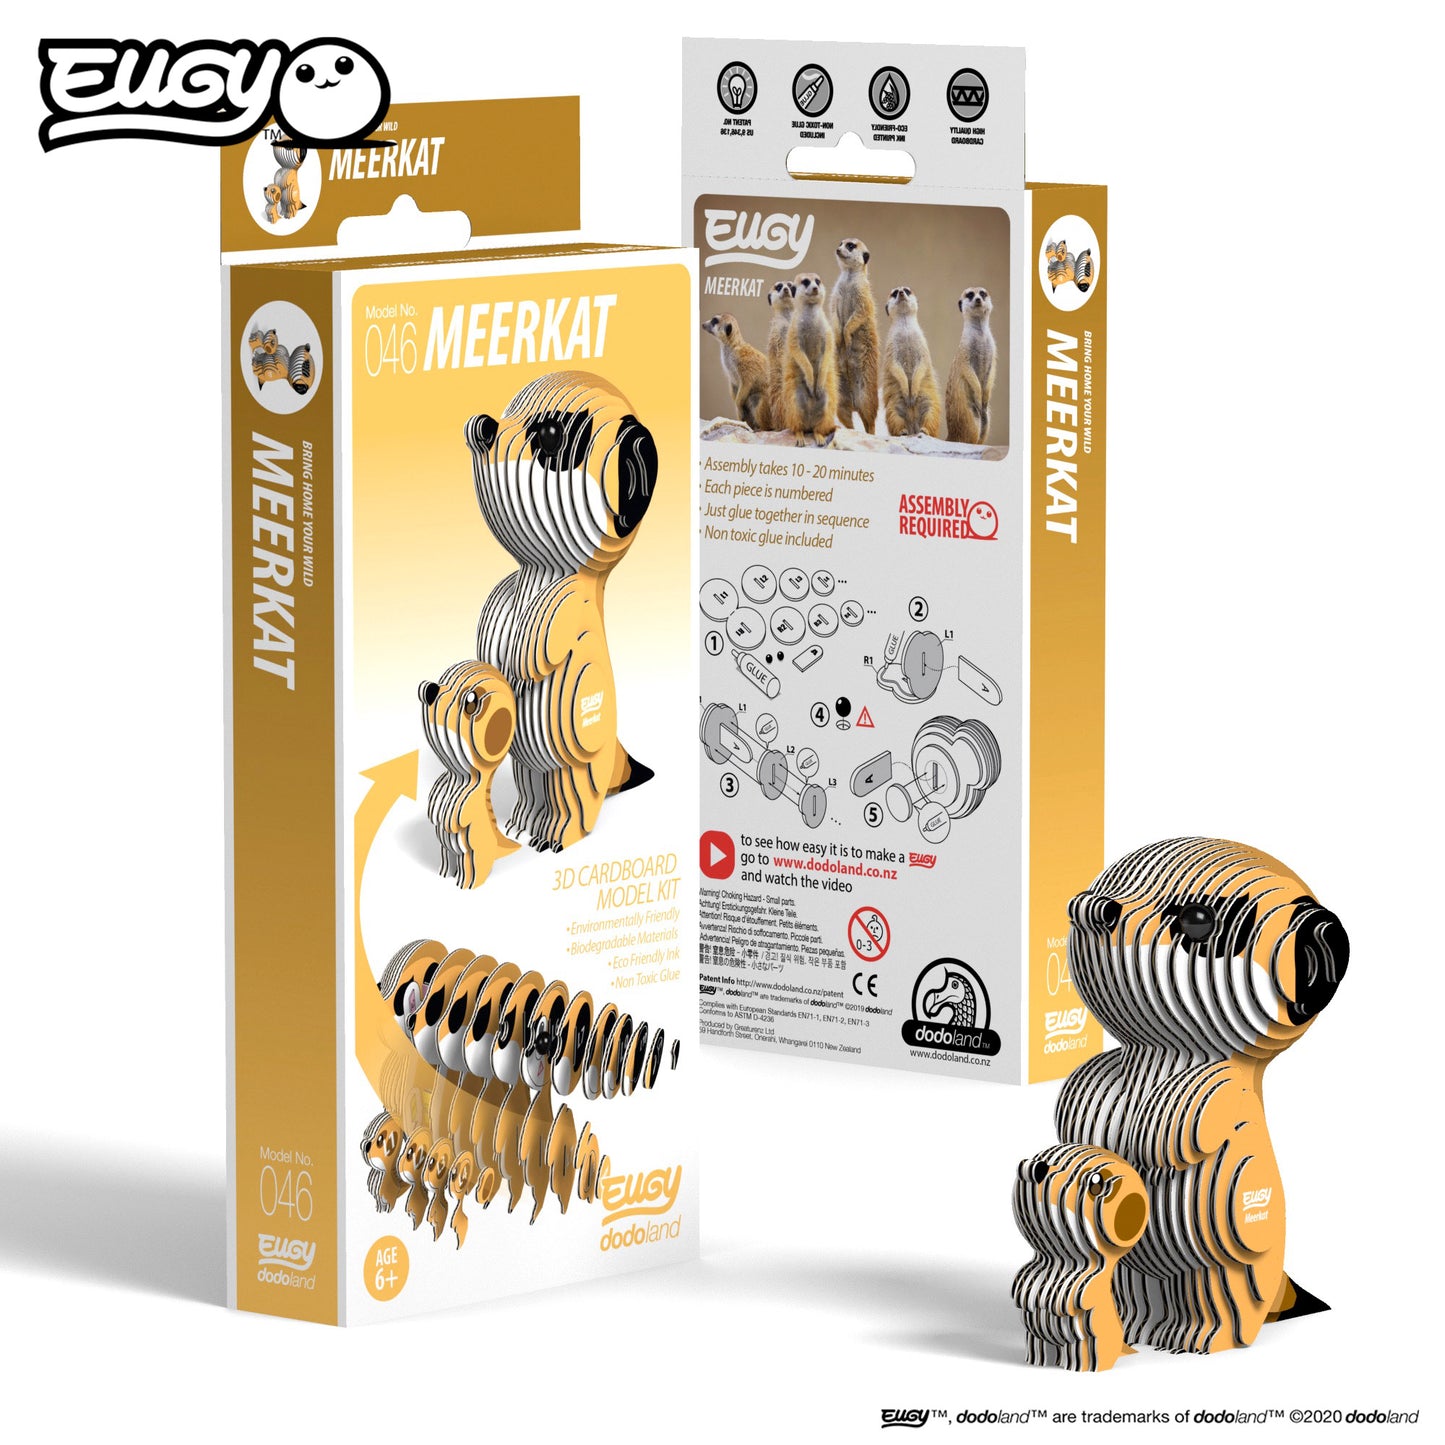 Embark on an Adventure with a Meerkat 3D Puzzle by Eugy - 3D Meerkat ( 046 )